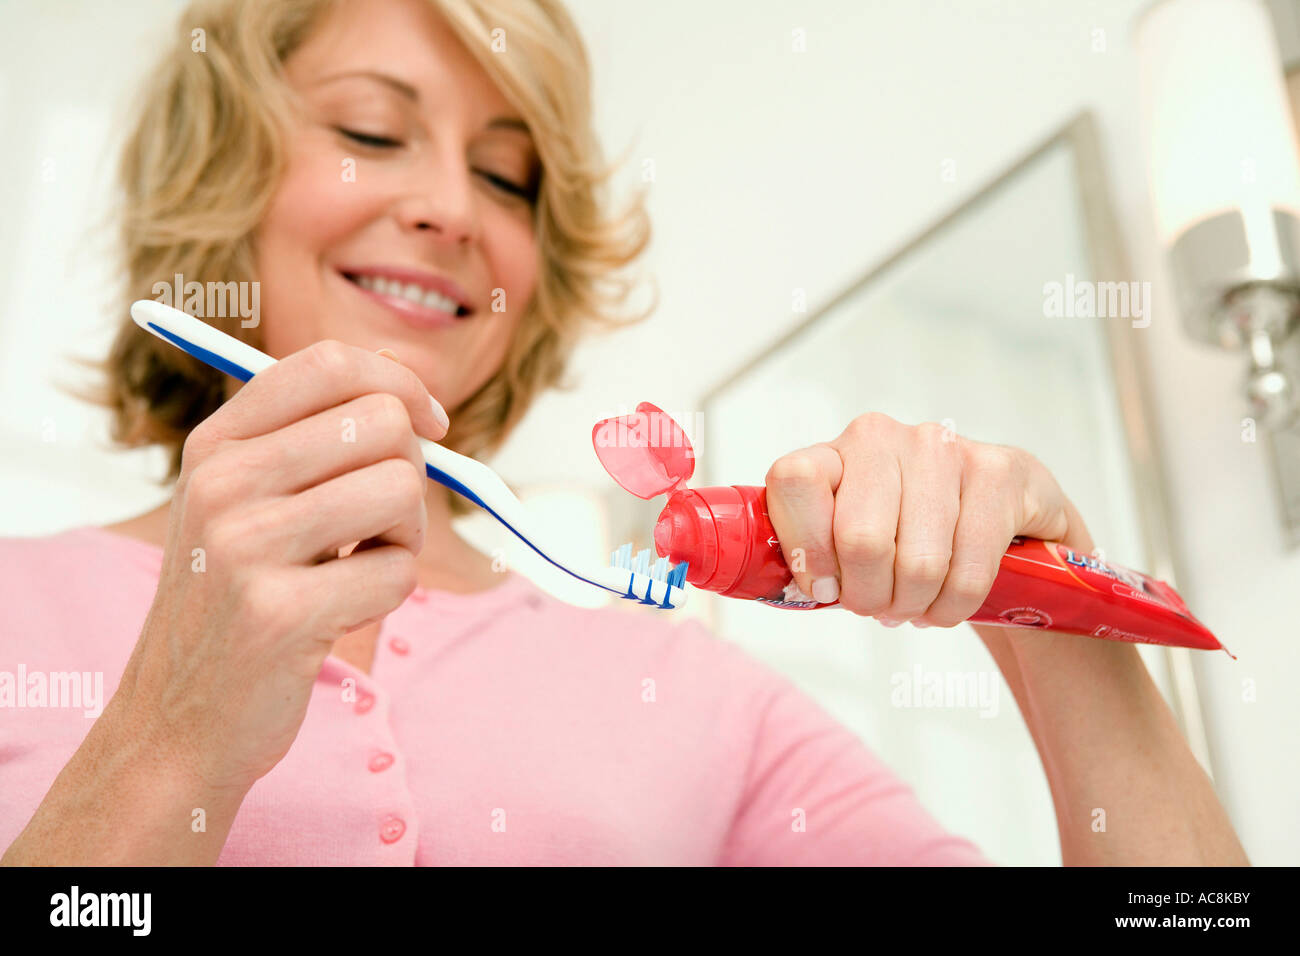 Low angle view of a mid adult woman putting toothpaste on a toothbrush Stock Photo